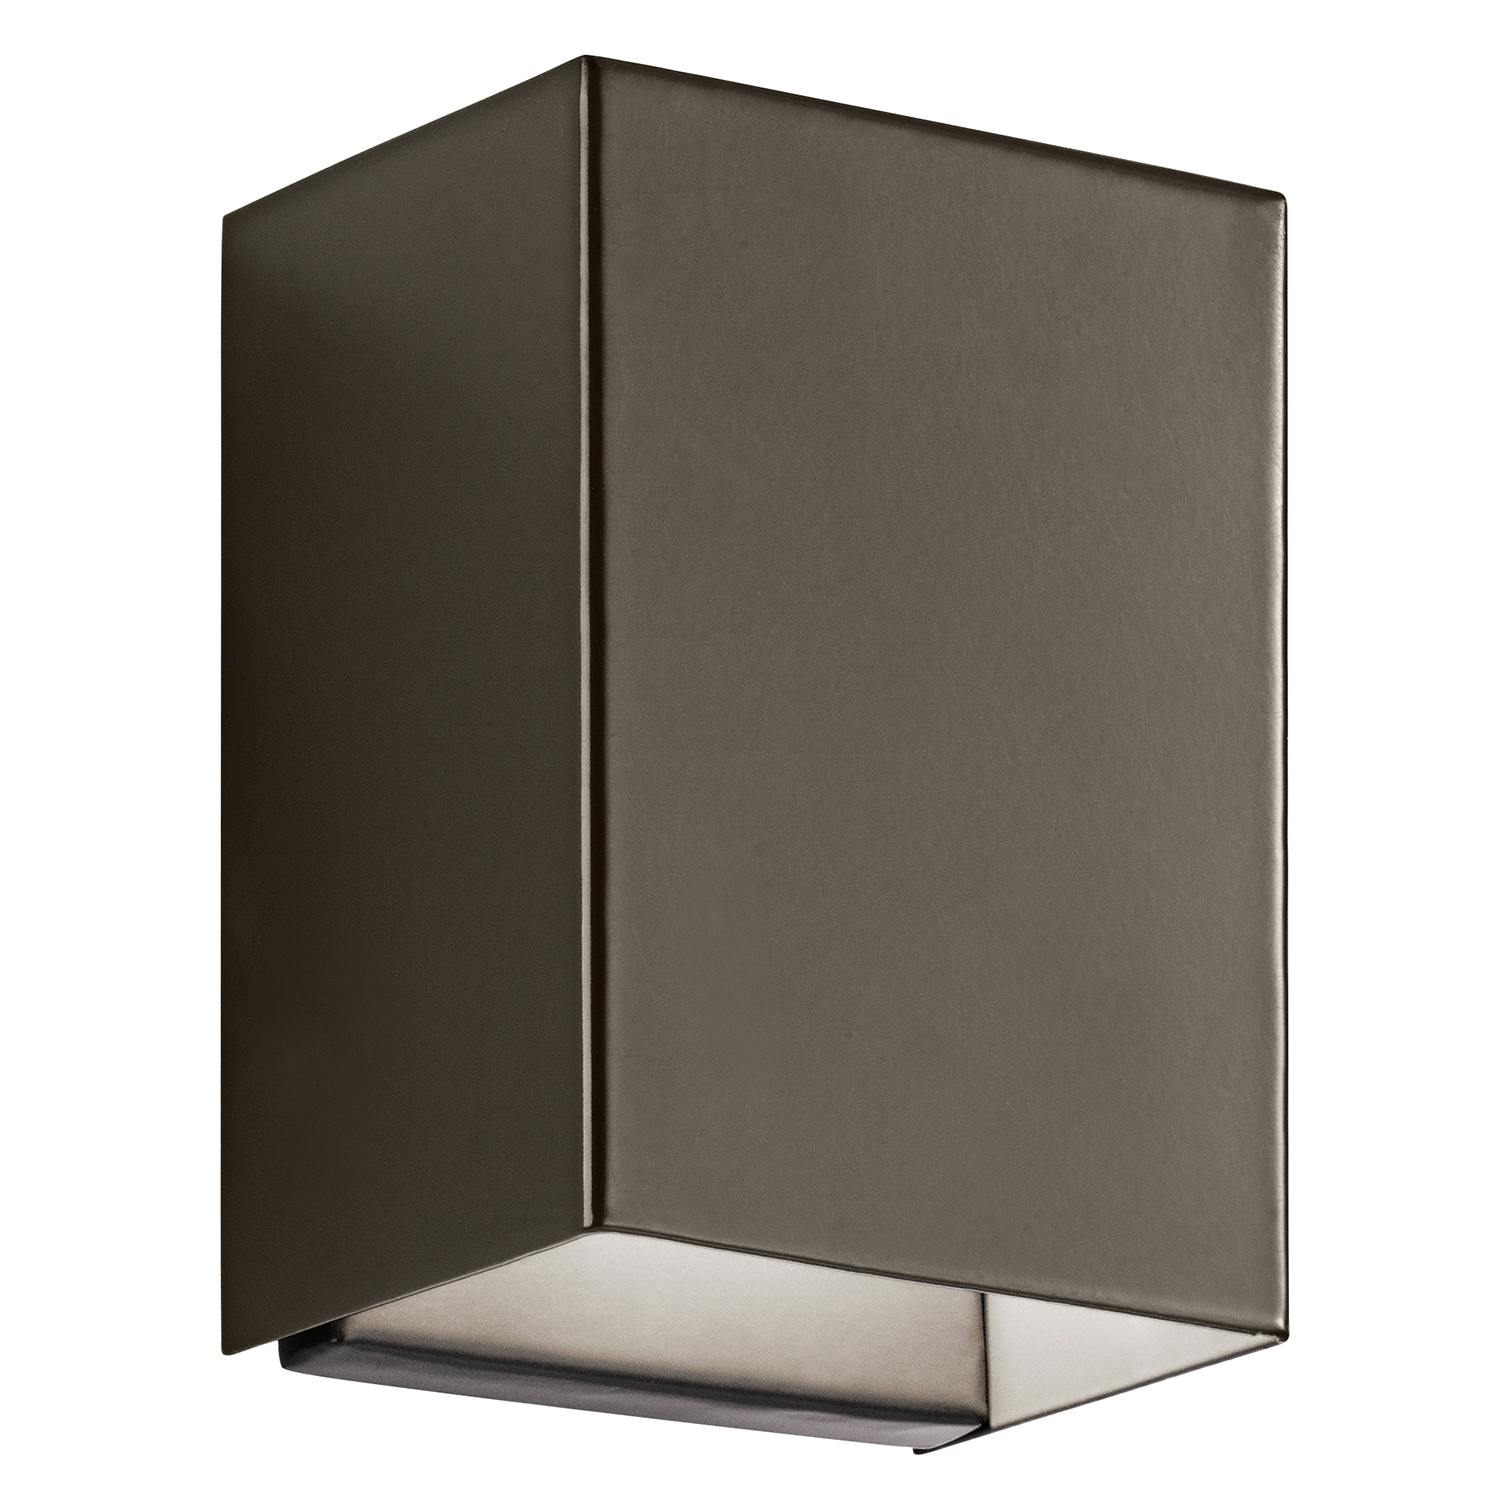 Walden 7.25" LED Wall Light in Bronze on a white background